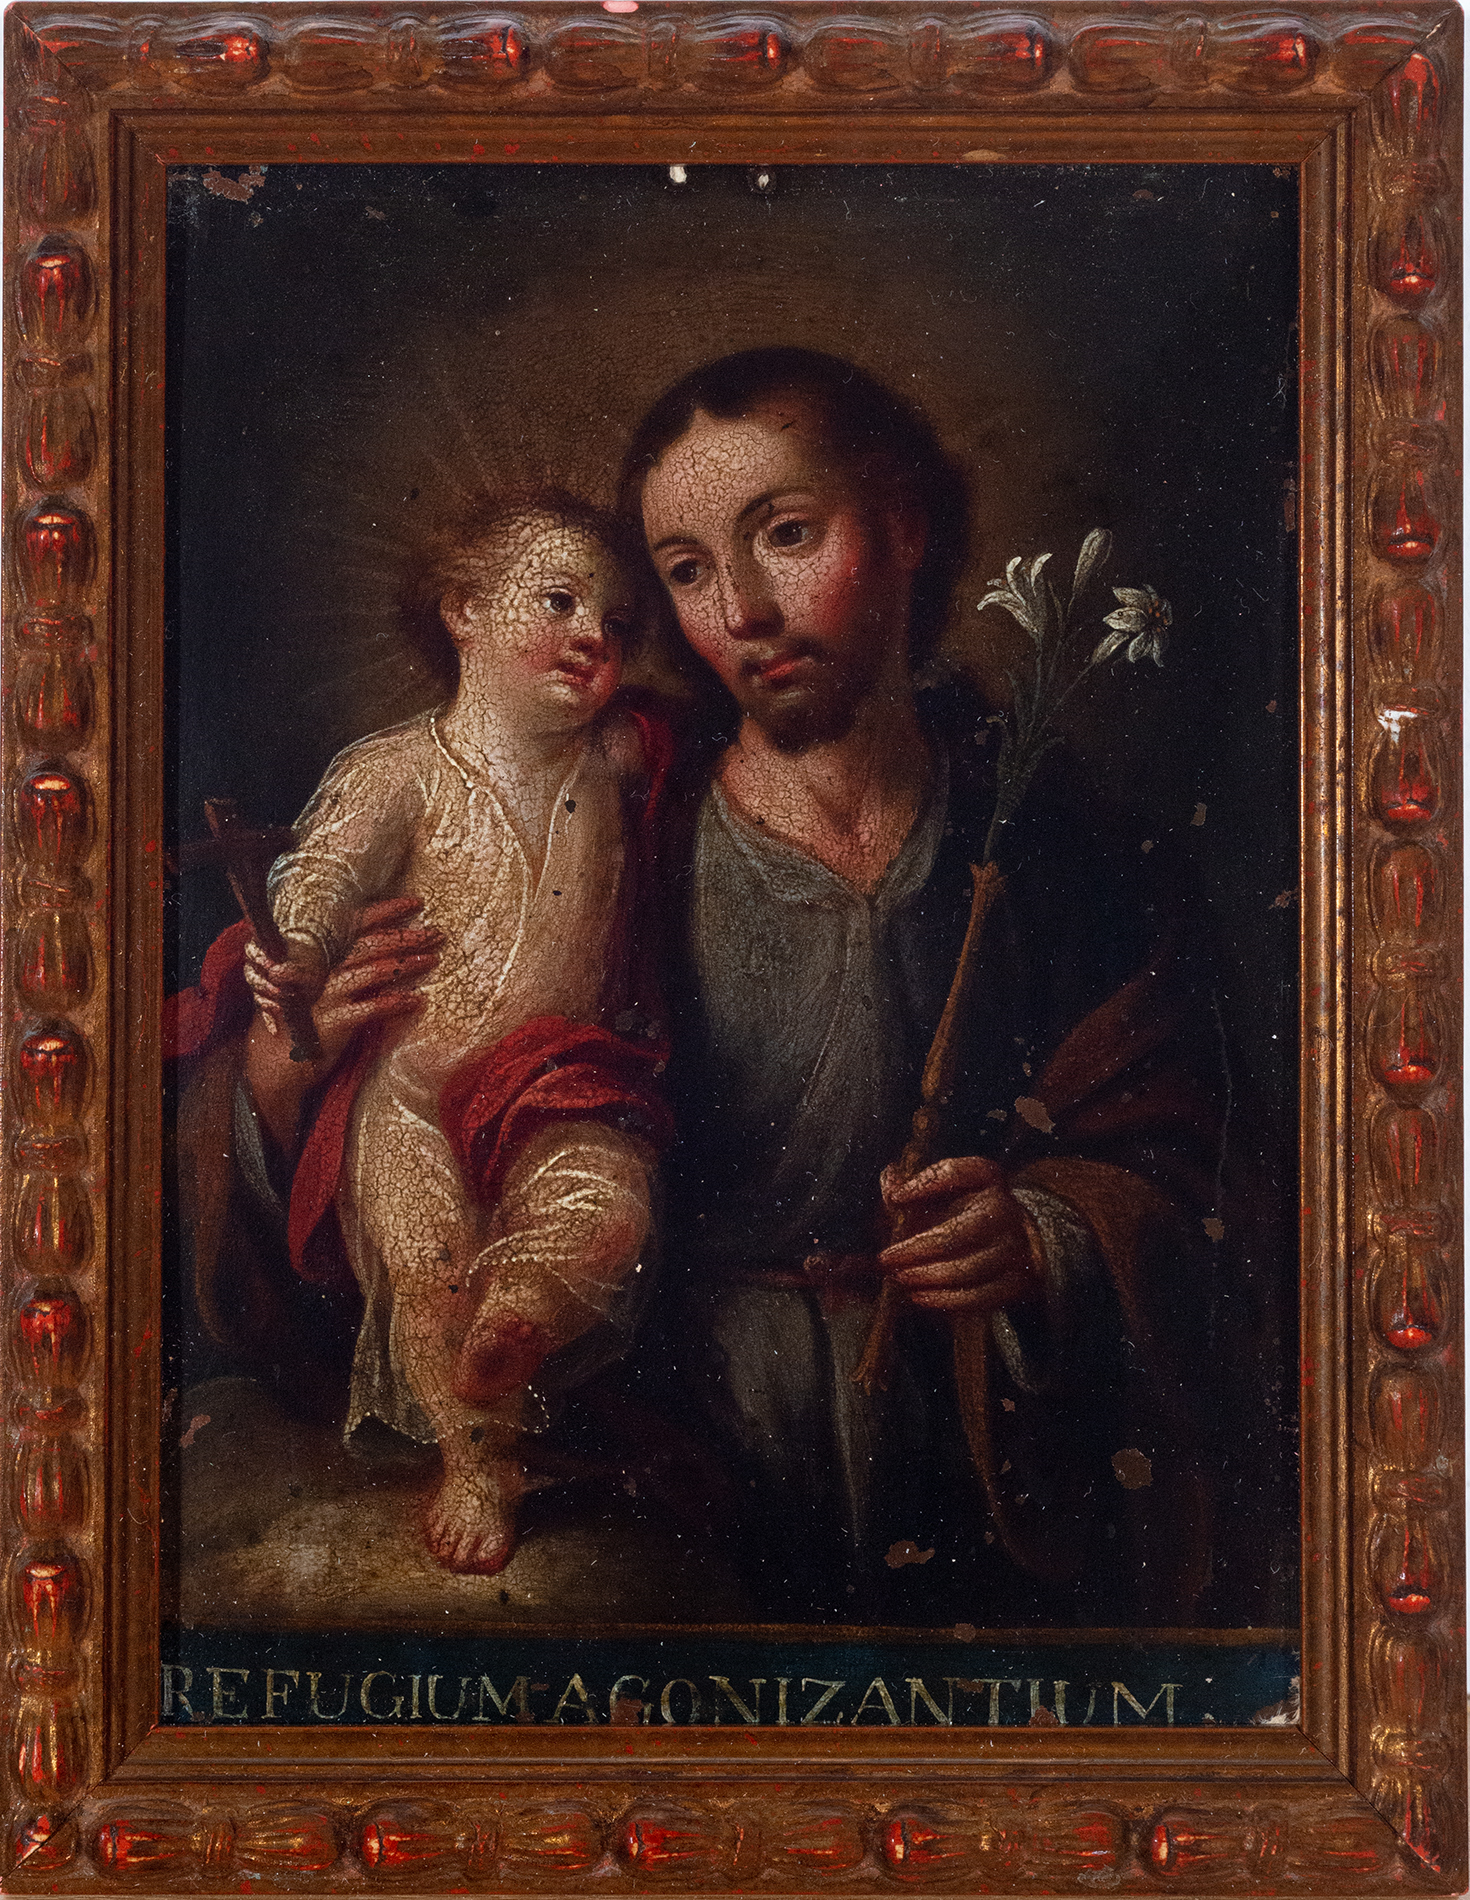 Exceptional Copper of Saint Joseph with Enfant Jesus, 18th century New Spanish colonial school, in t